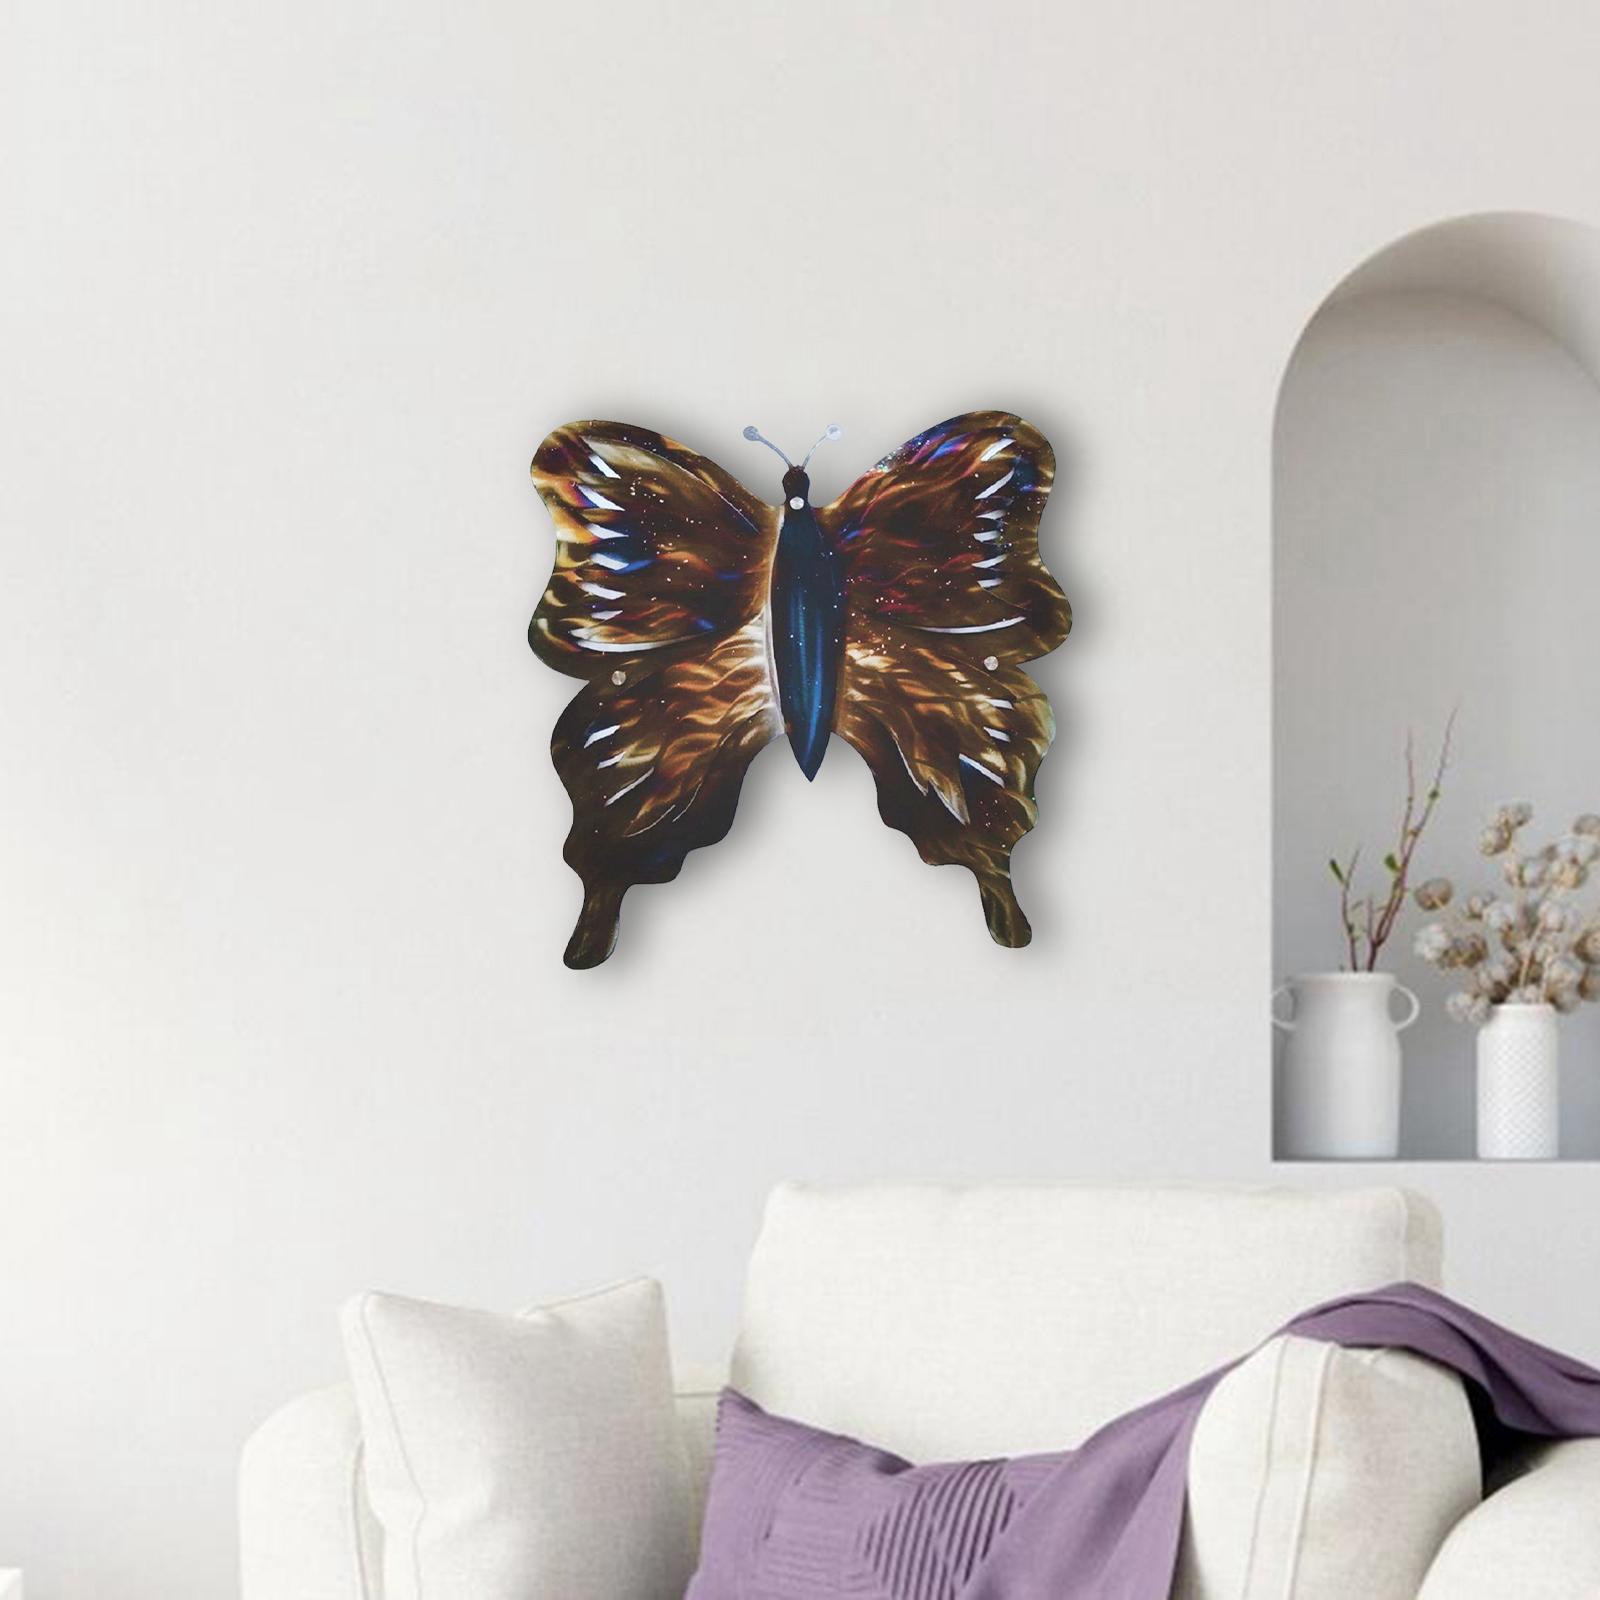 Modern Outdoor Butterfly Wall Sculptures for Home Living Room Decoration S